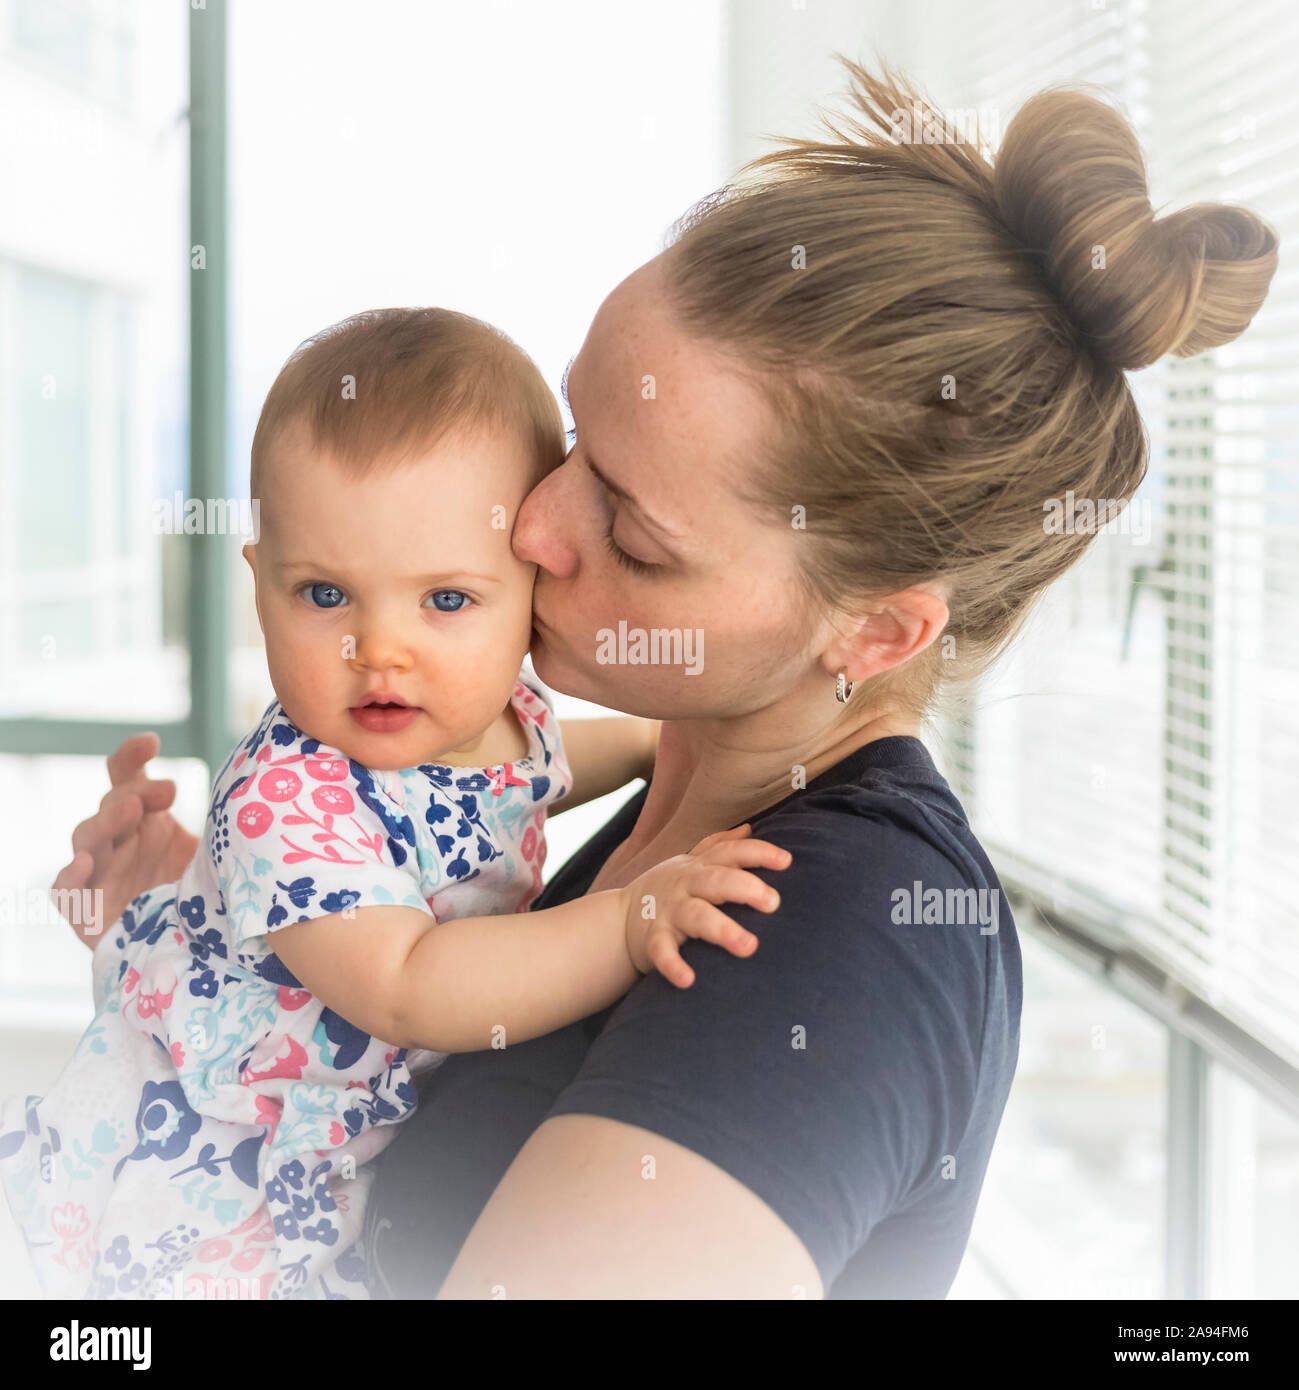 Portrait of infant baby girl with mother at home, mother kissing baby on the cheek; Vancouver, British Columbia, Canada Stock Photo